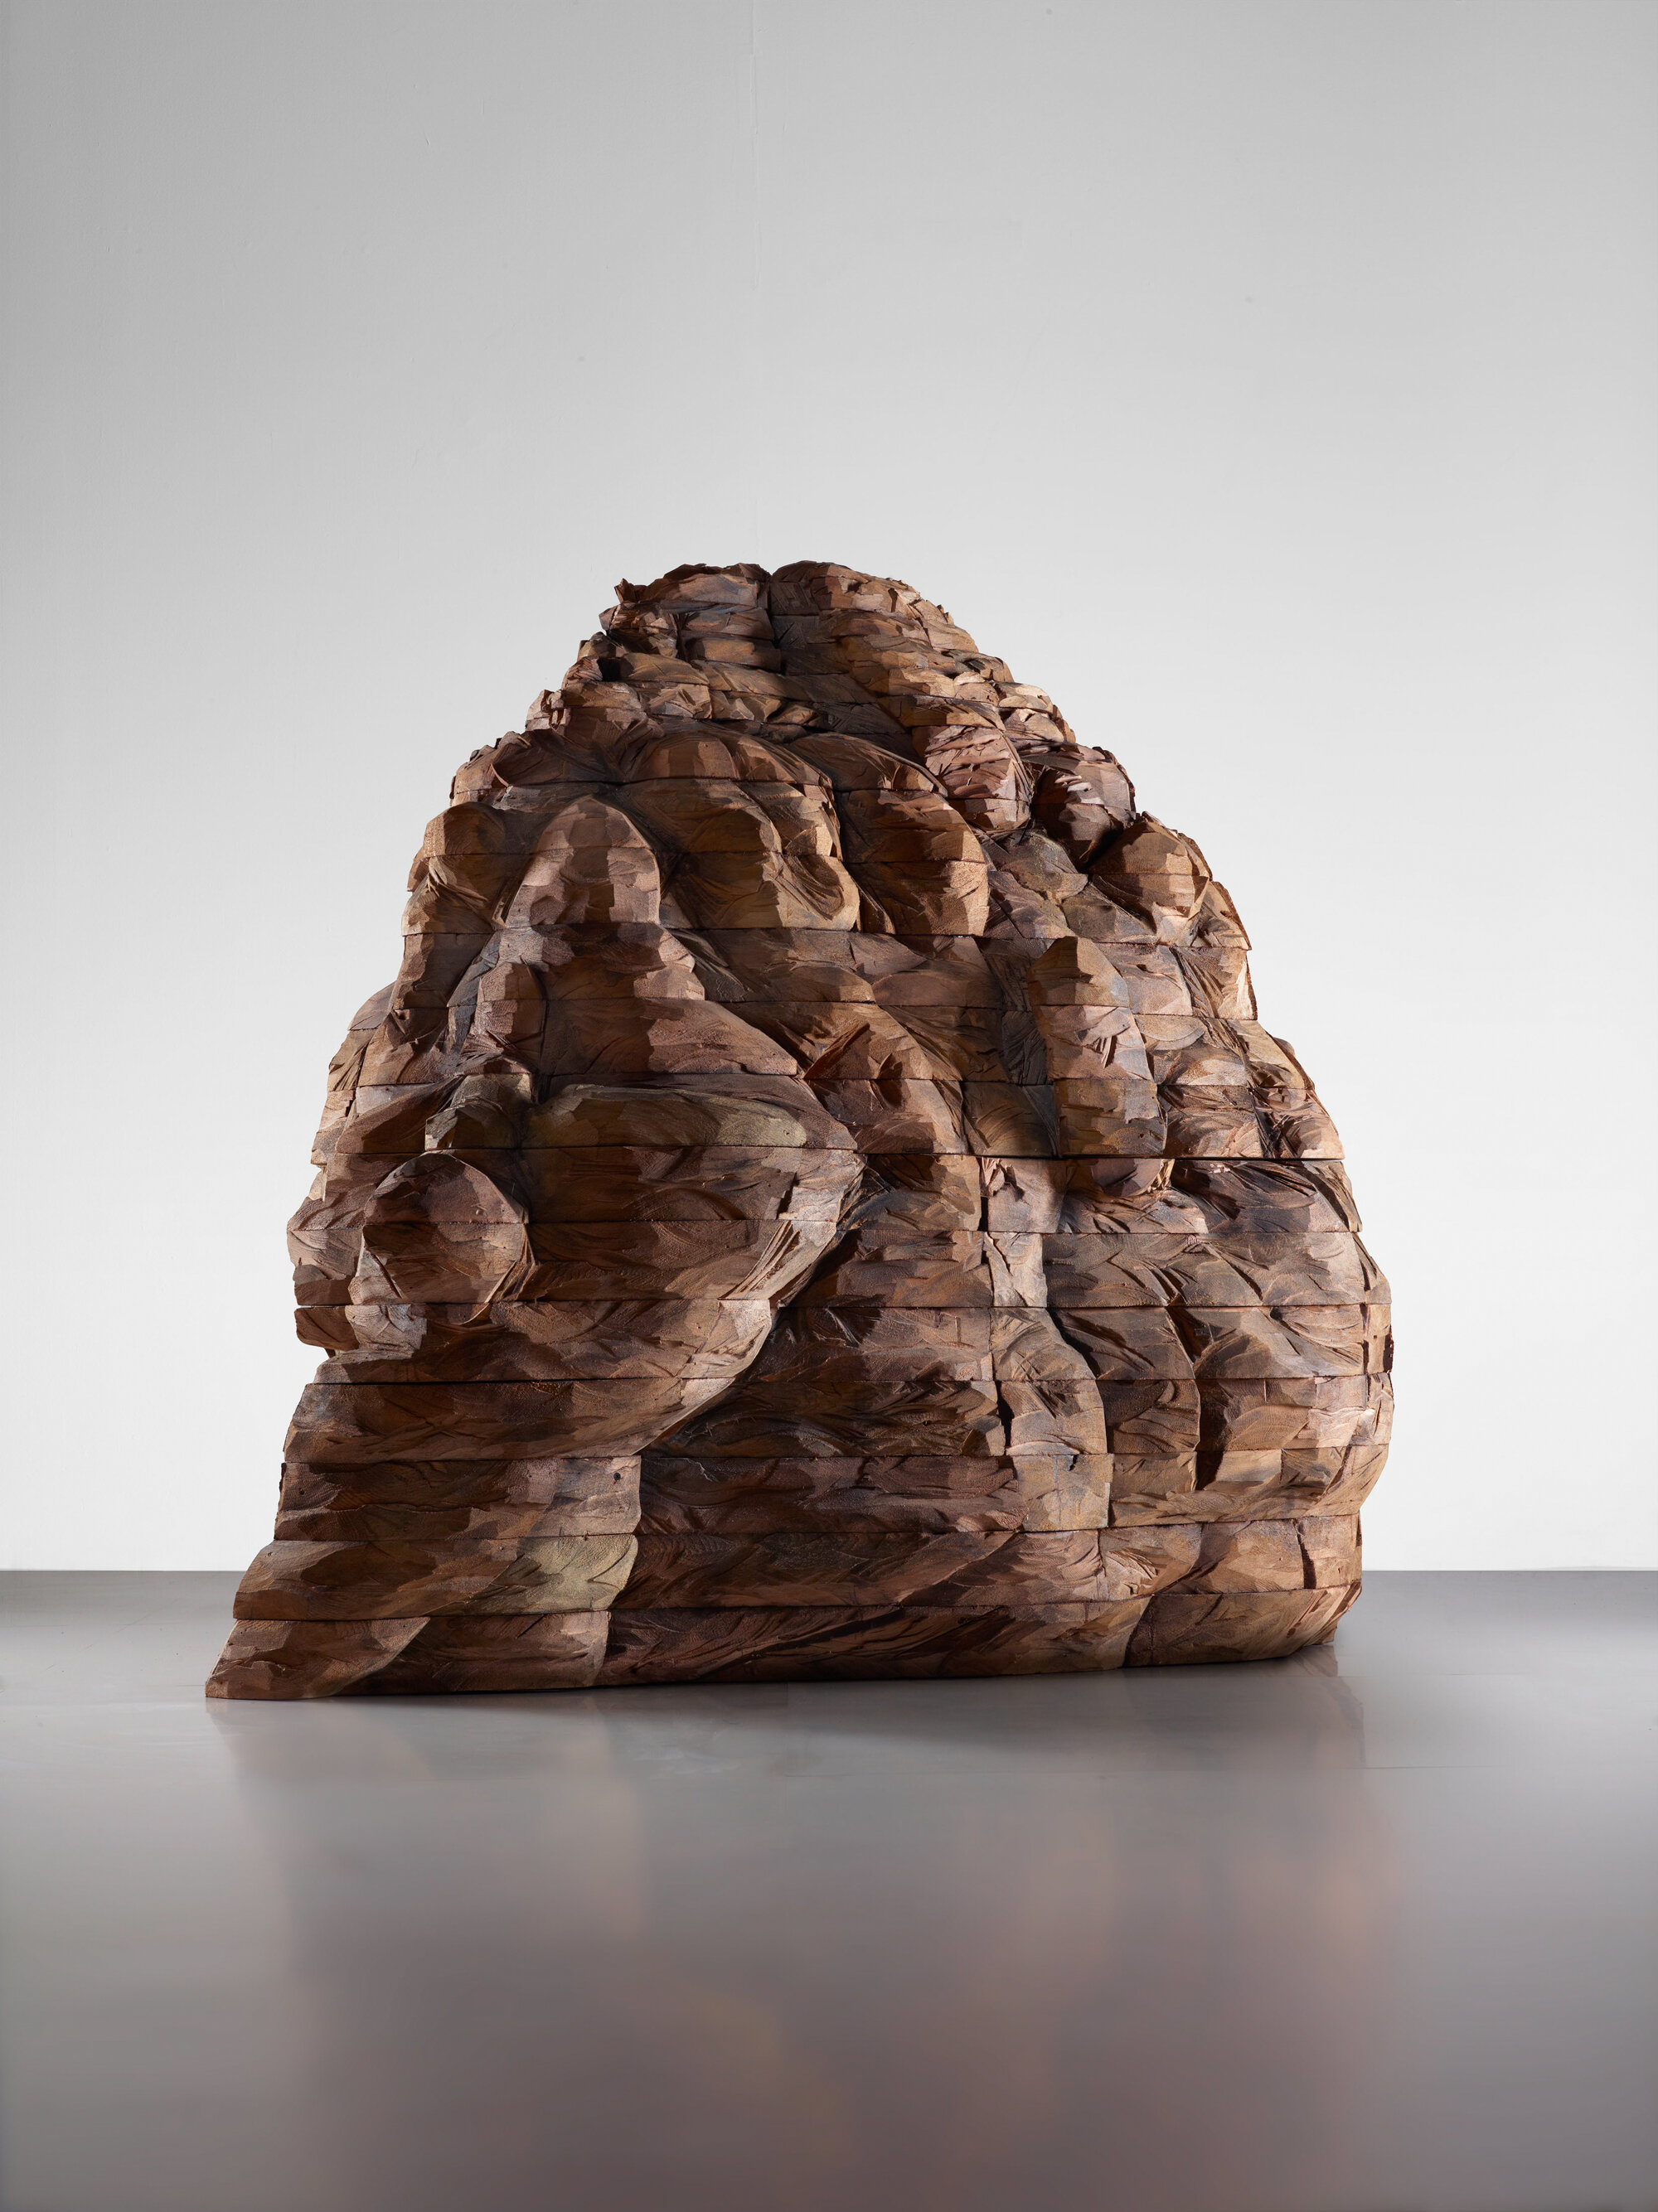       Taste of Metal,  2011 Cedar and graphite 54 x 45 x 62 in.    MORE IMAGES   Galerie Lelong &amp; Co.  